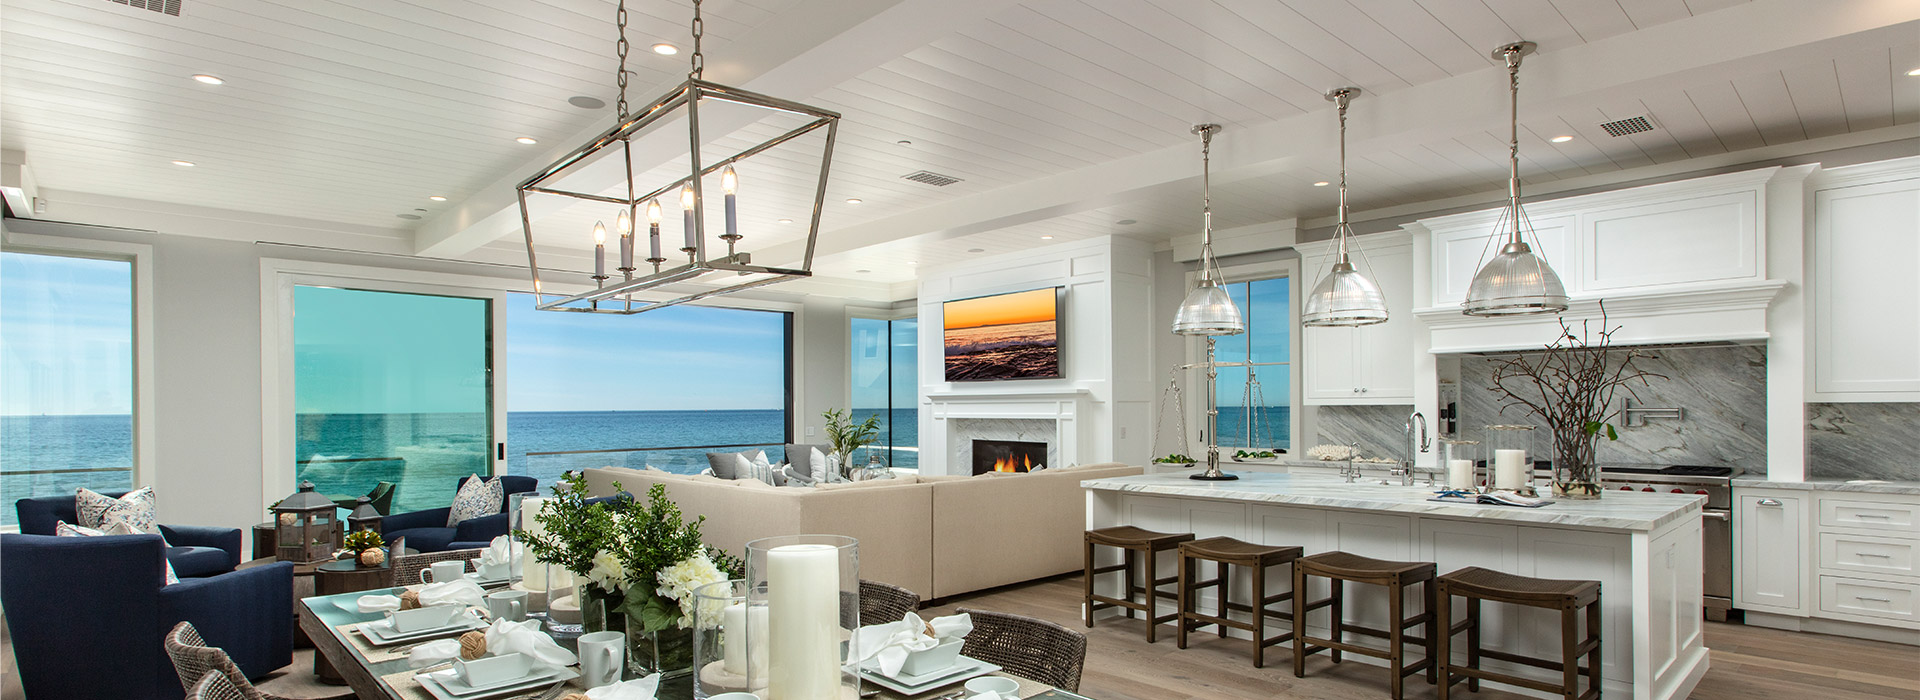 Coastal style living with a white shiplap ceiling that has sliding glass doors on the left that lead to the patio with an ocean view, in the bottom left corner of the room there are 3 blue single cushion sofas, in the top left corner there is an L shaped cream couch, 2 grey single cushion sofas, a fireplace, and a mounted flat screen tv, on the bottom right corner there is a set 8 seater rectangle wooden dining table and to the top right is a white marble kitchen with an island with 4 brown stool and 3 glass lights overhead.